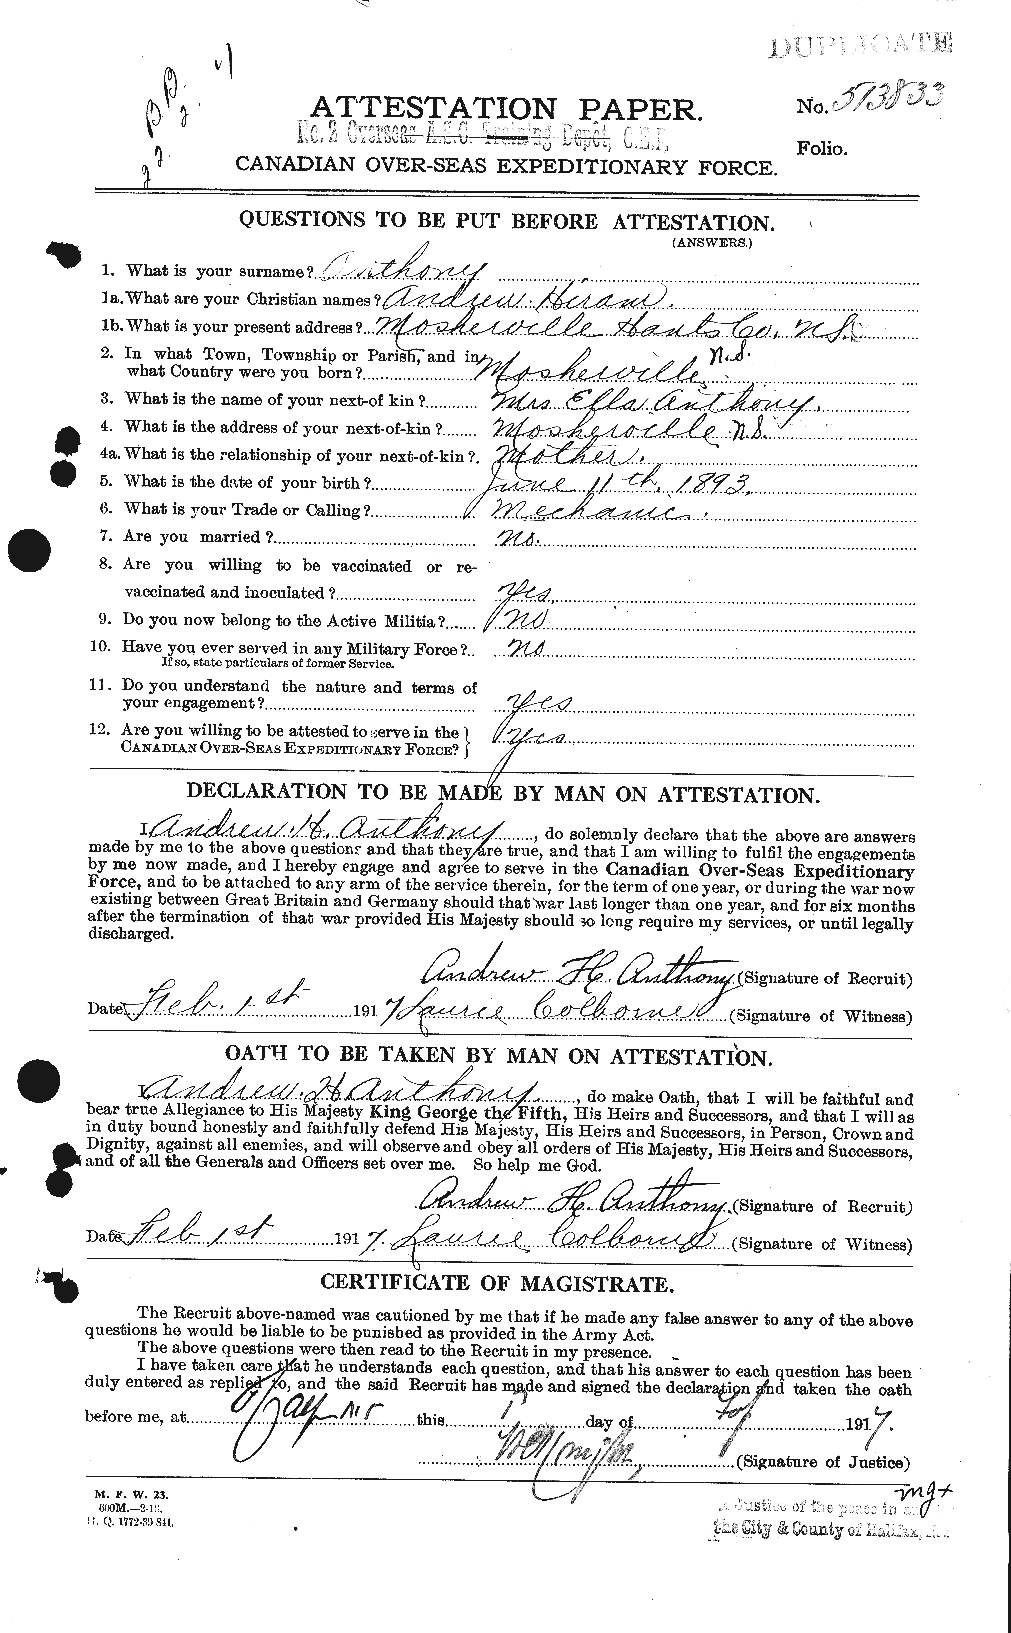 Personnel Records of the First World War - CEF 212239a